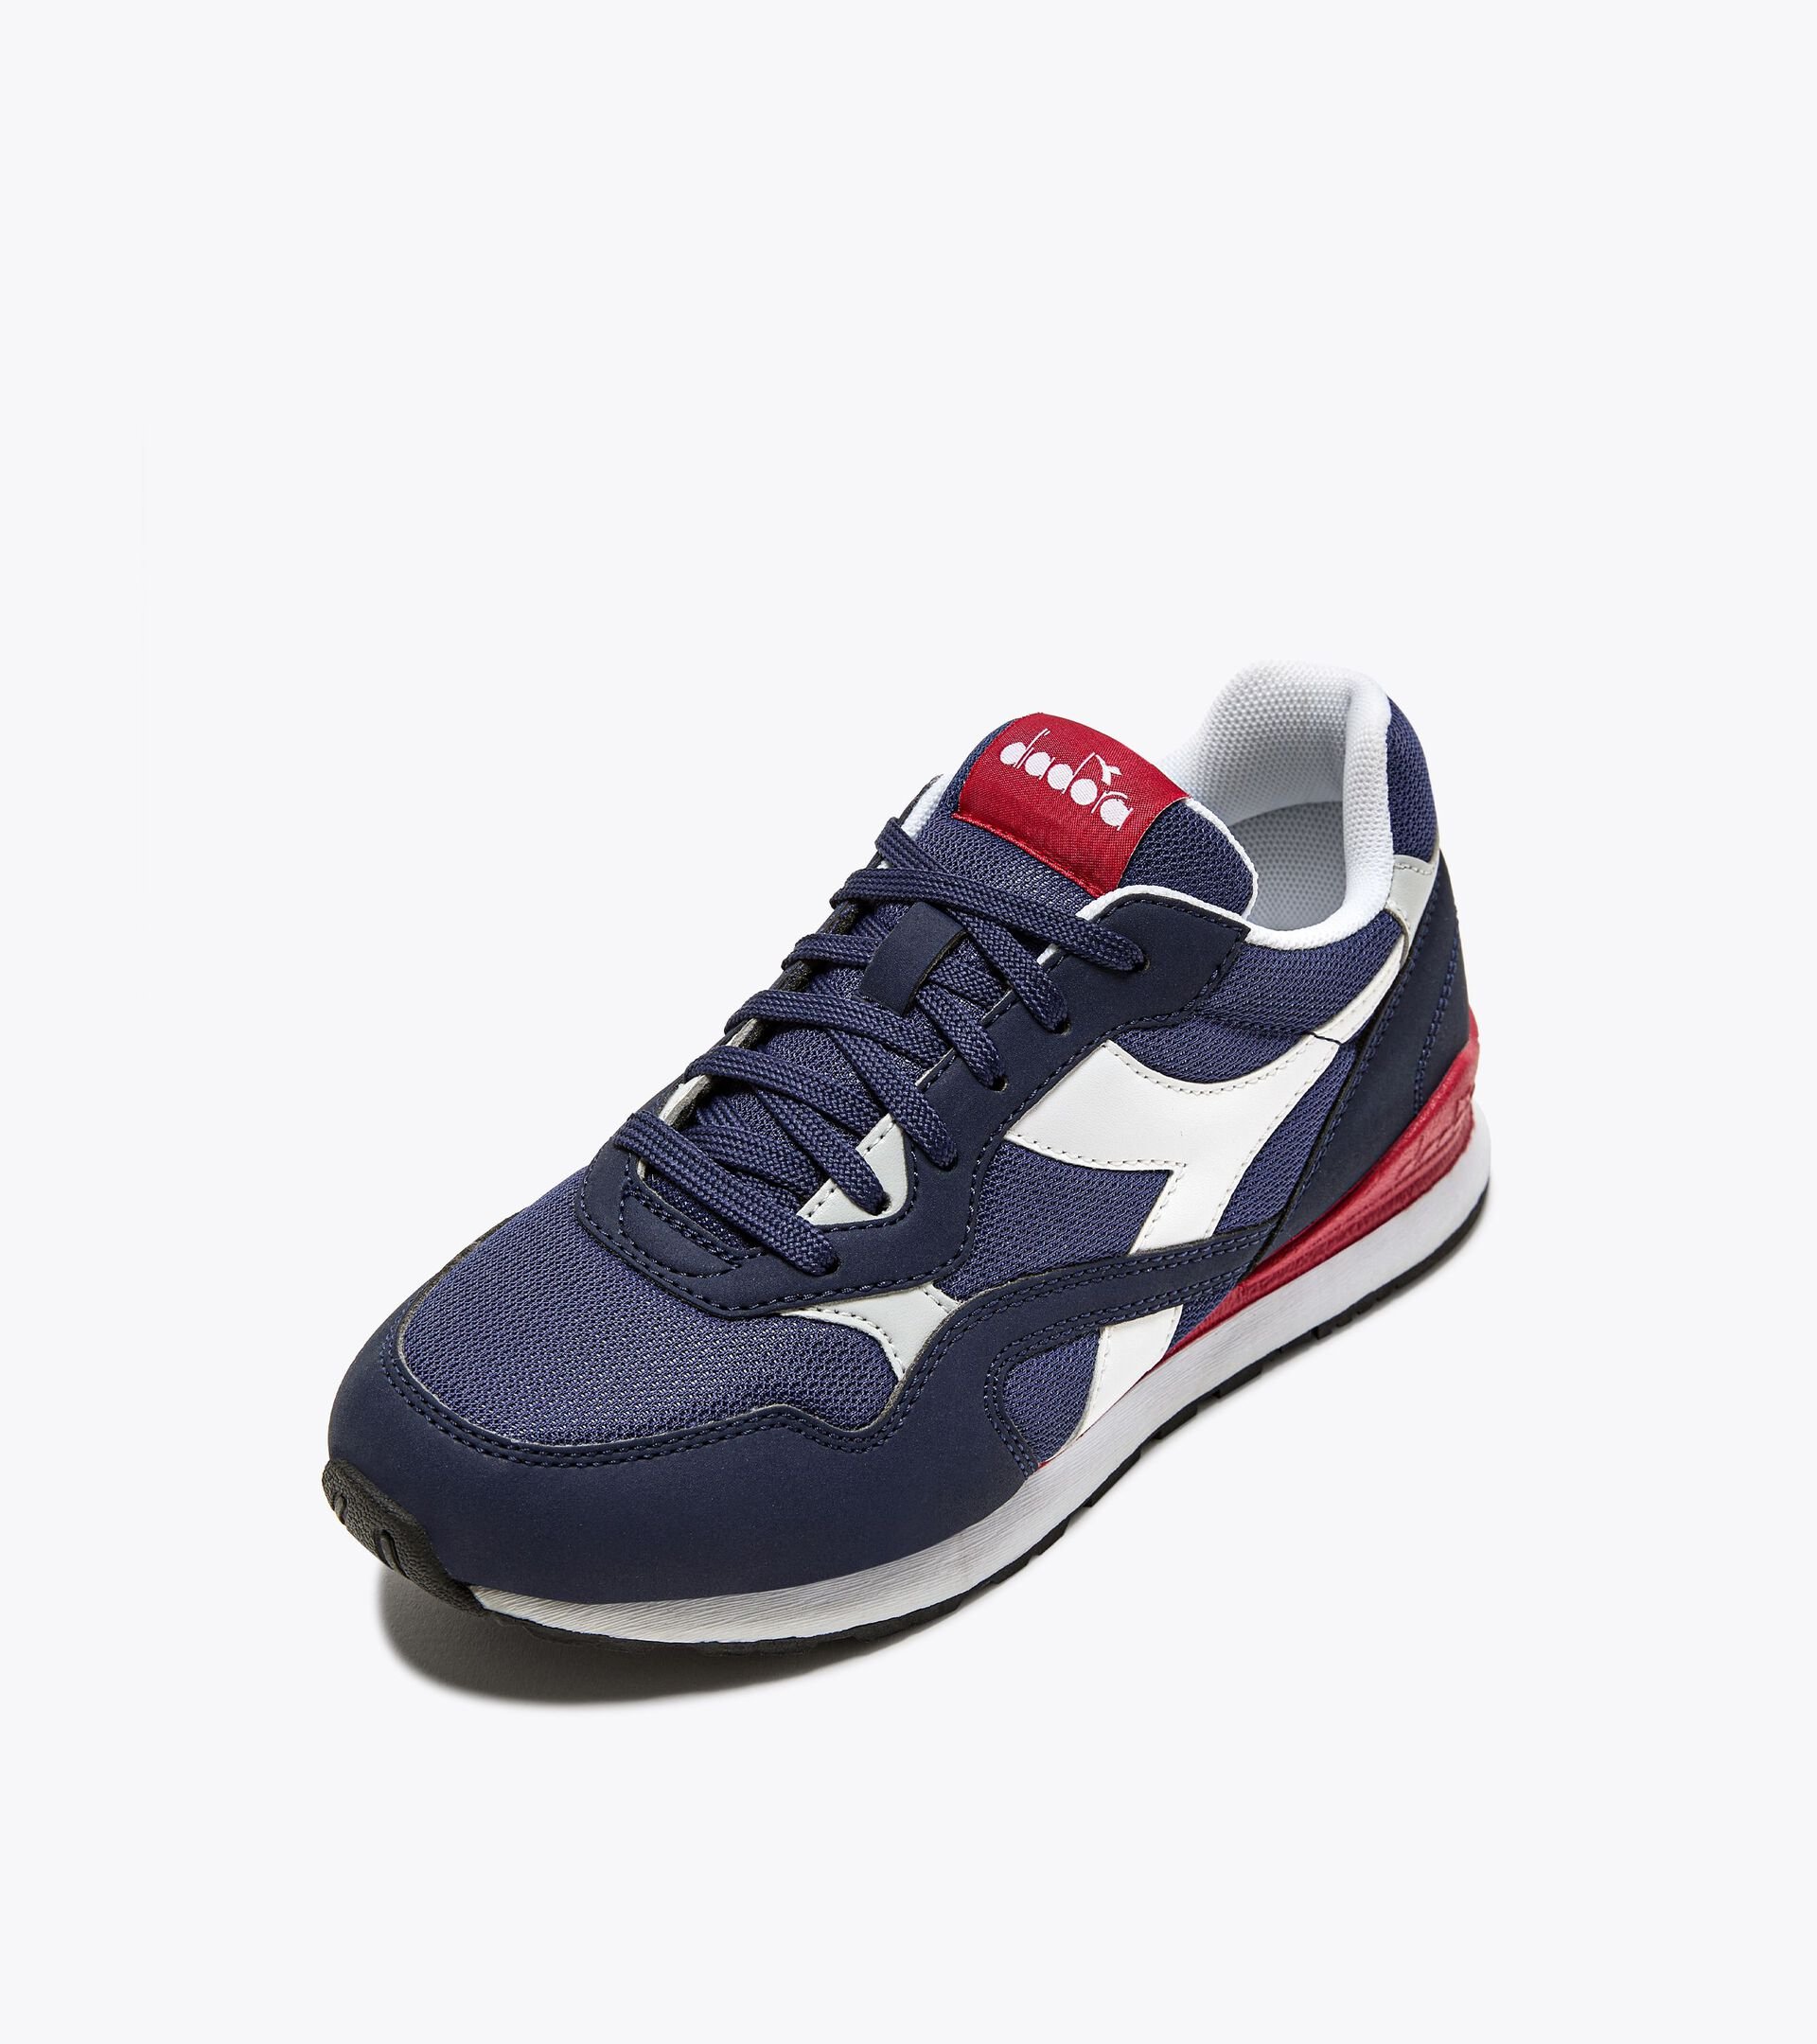 Sports shoes - Youth 8-16 years N.92 GS PEACOAT/PEACOAT/WHITE - Diadora